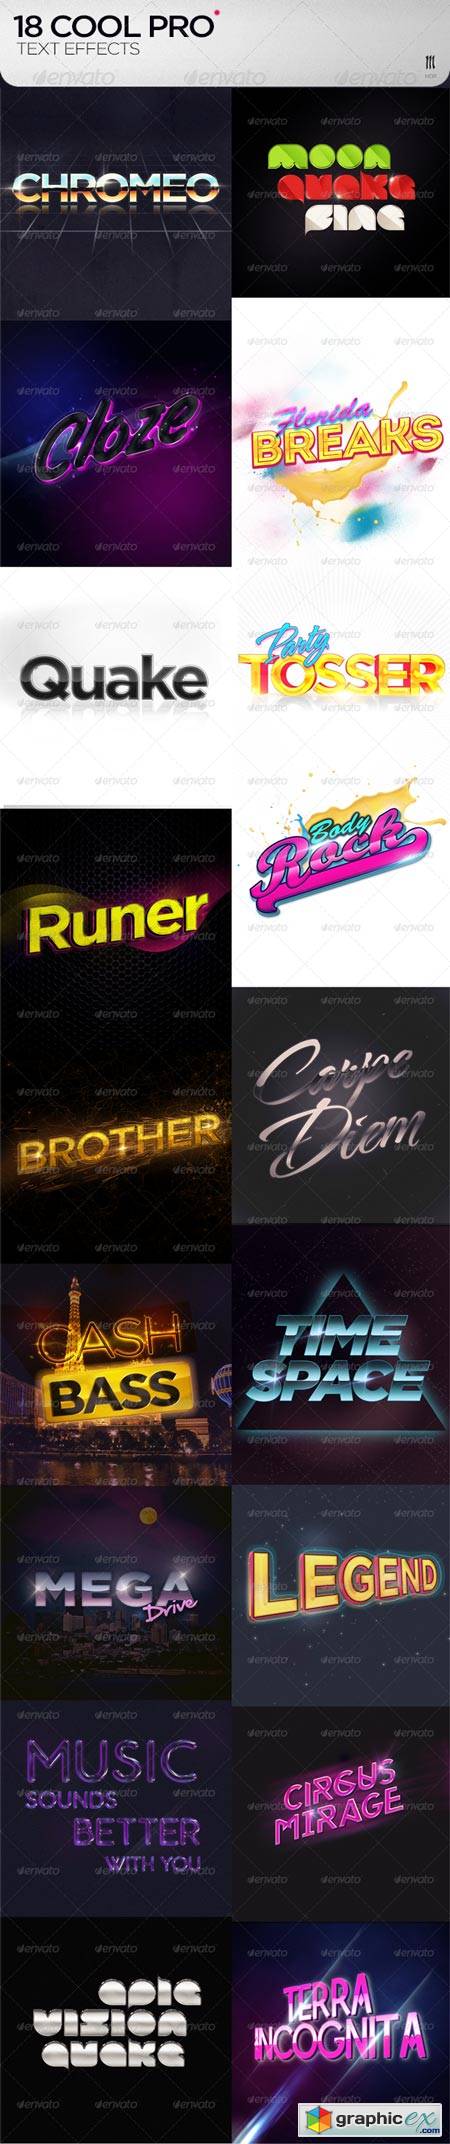 18 Cool PRO Text Effects + .PSD 8111597